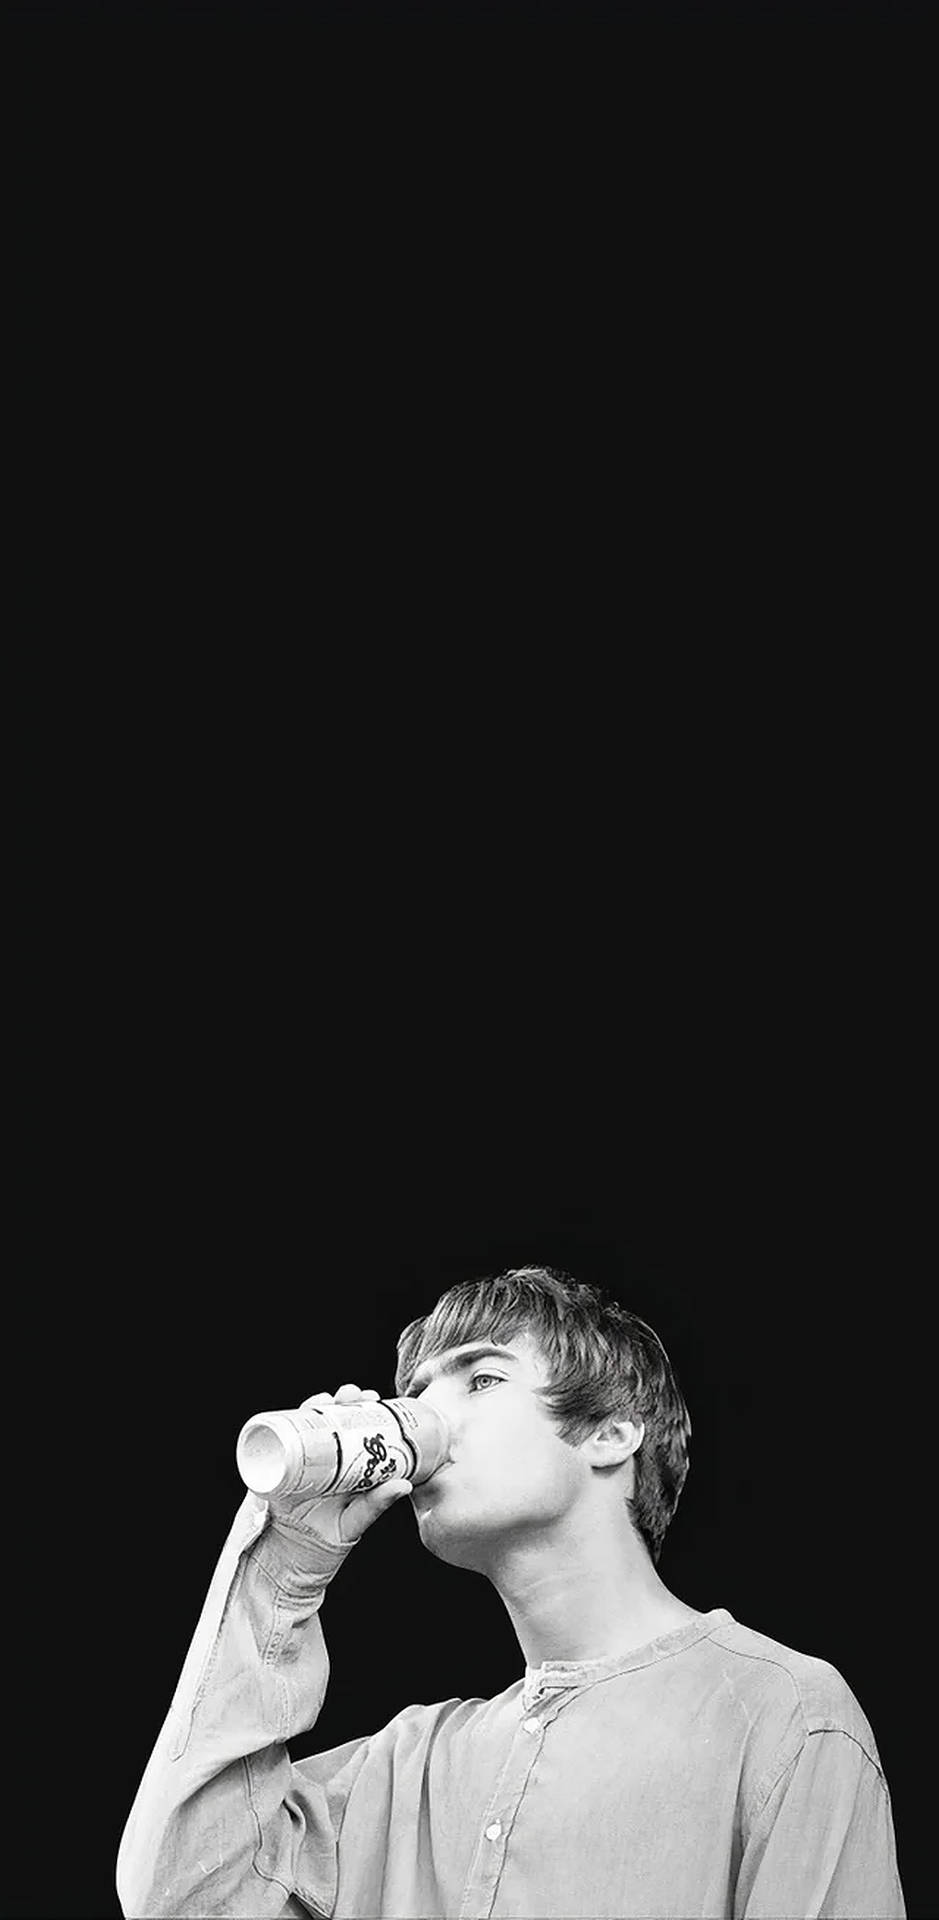 Oasis Liam Gallagher Wallpaper